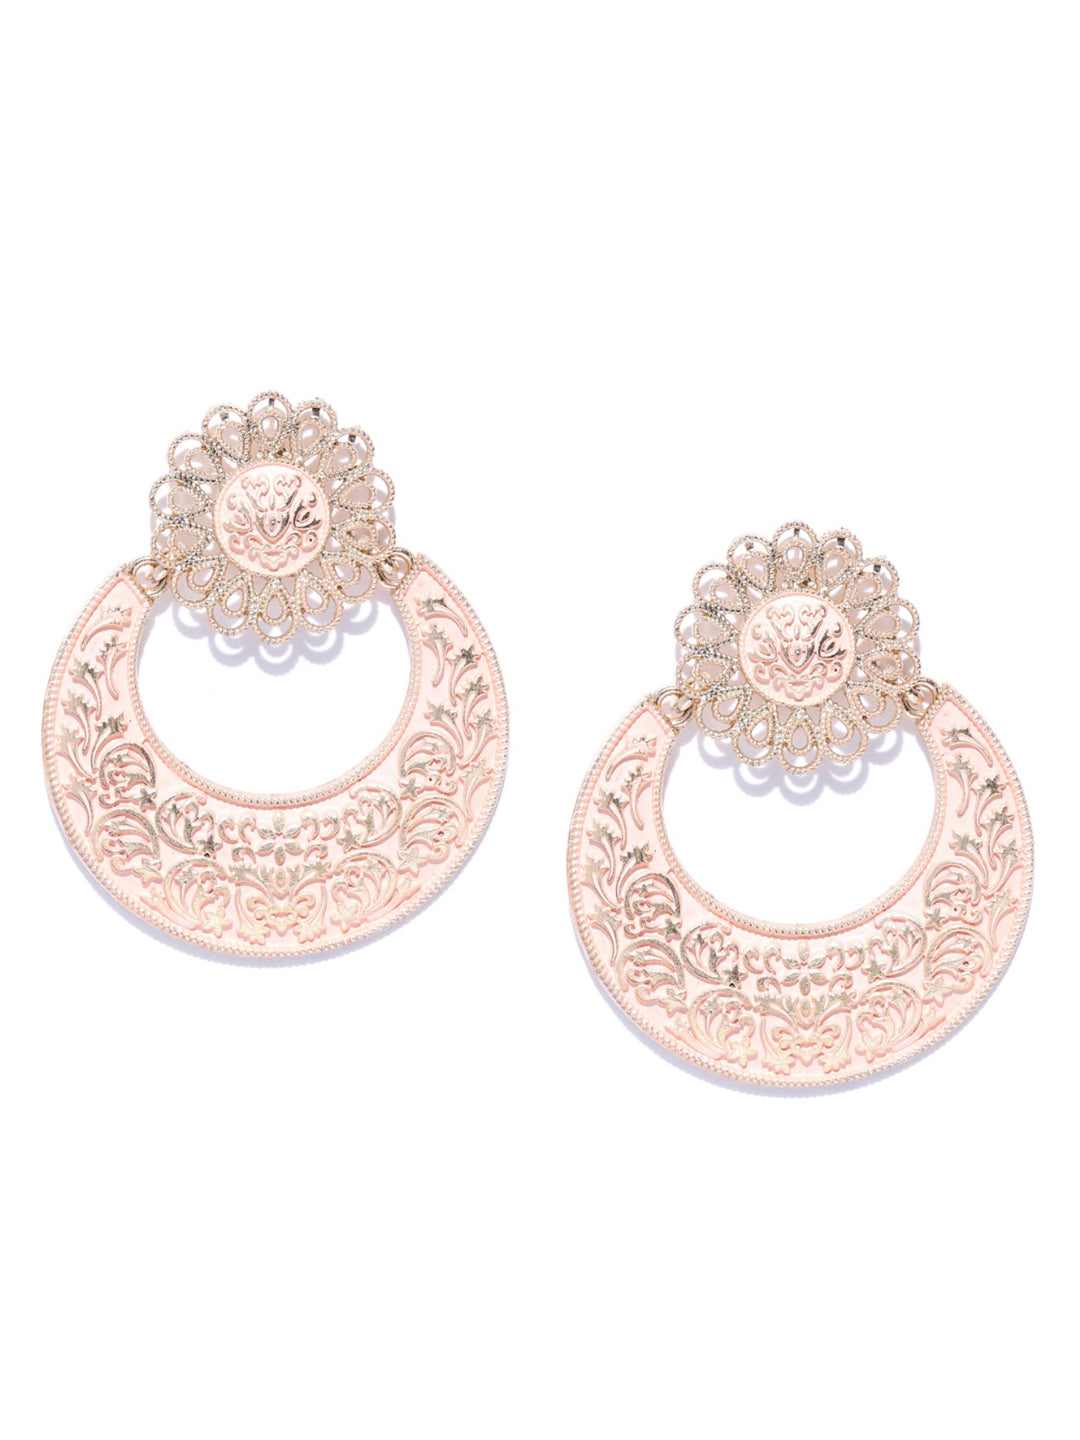 Designer Gold Plated Peach Colour Chandbalis Drop Earrings For Women and Girls